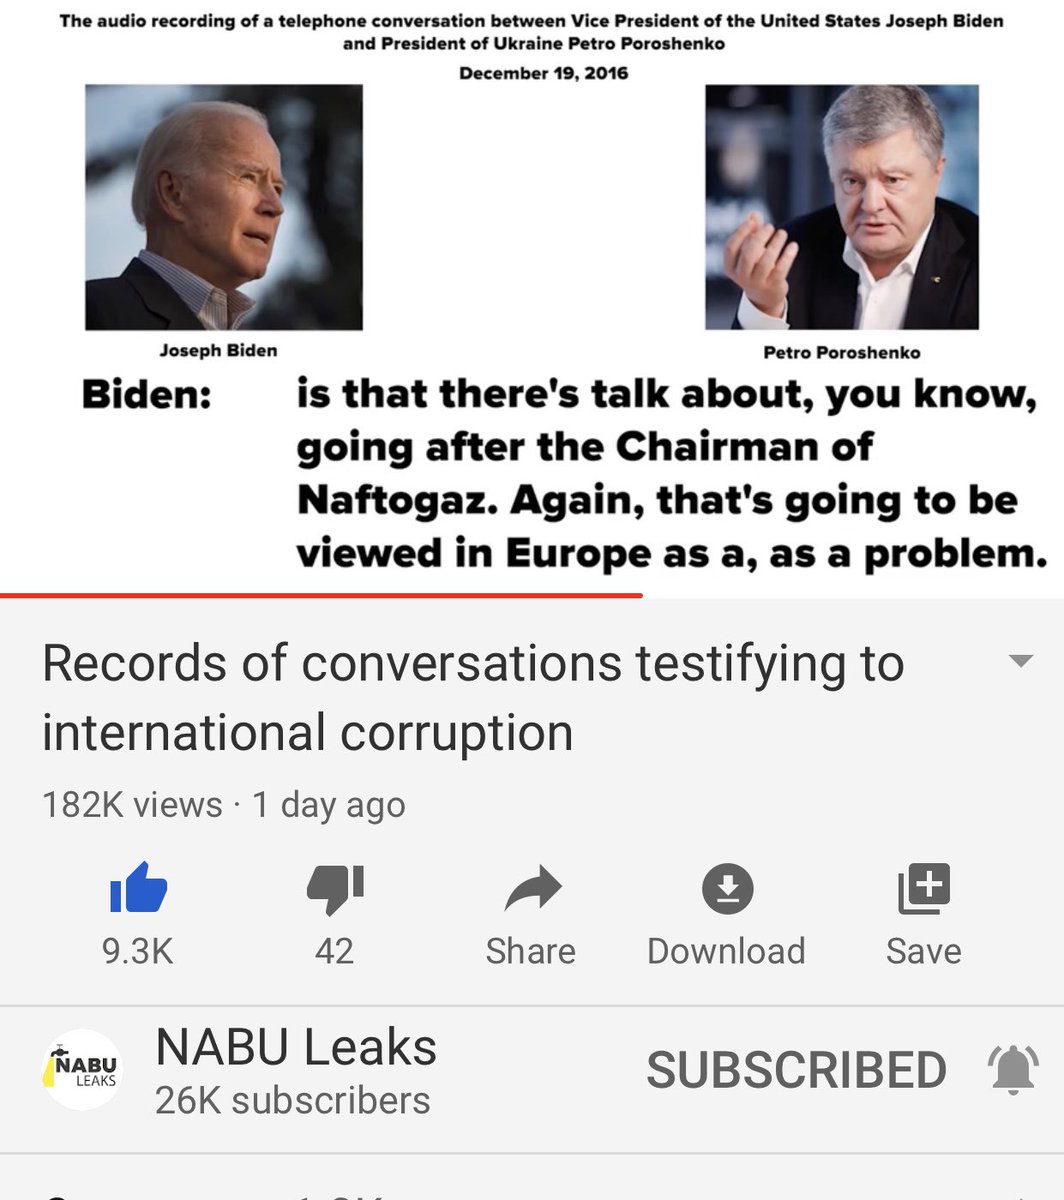 More 12/2016 and Biden says this is a key test for how Poroshenko is committed to fighting corruption but it’s only because someone’s listening in on the call. Biden IS the corruption. Then it shifts to Naftogaz and Biden’s saying there’s talk about going after the chairman